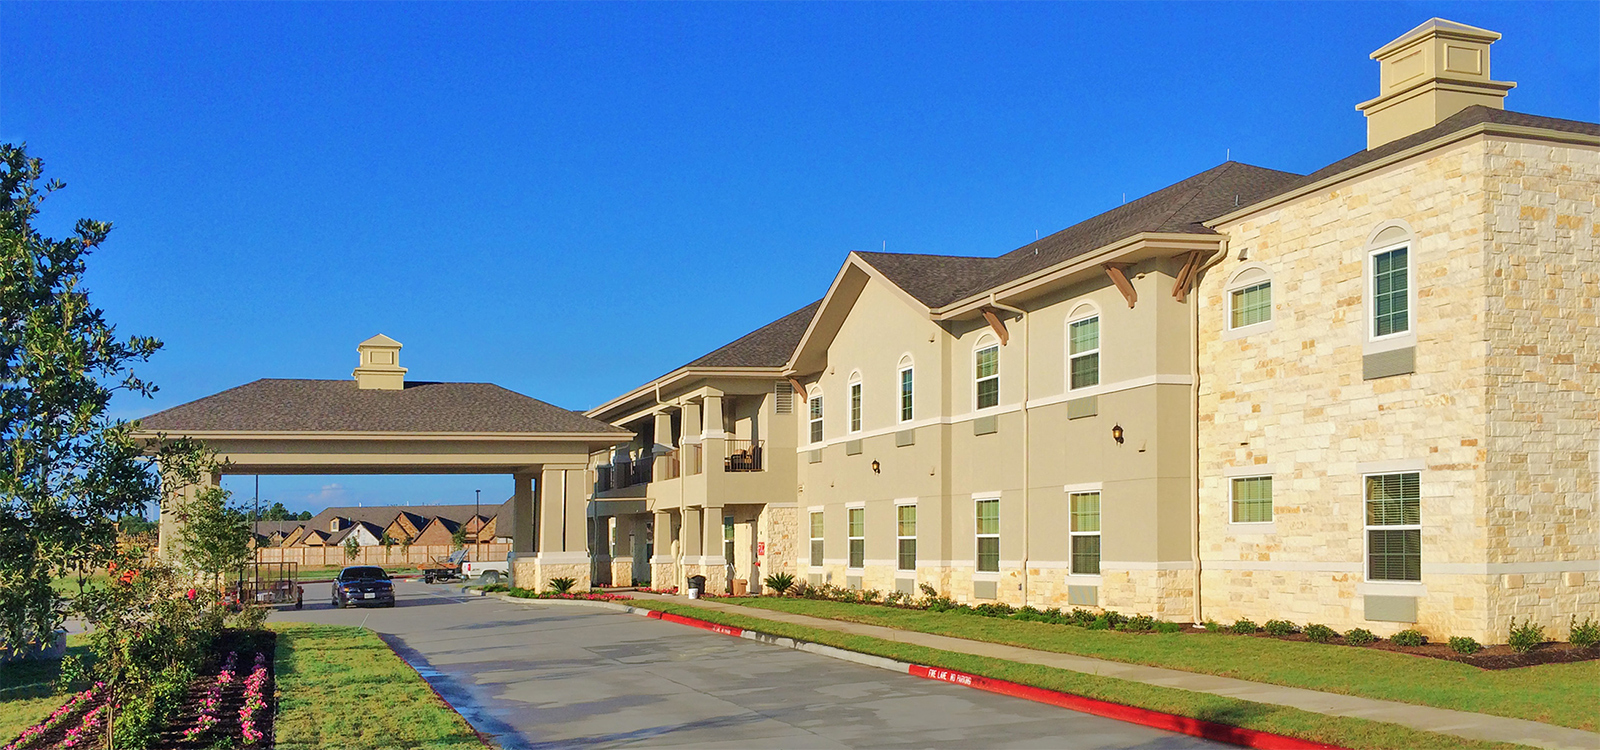 Exterior building of Legacy at Falcon Point senior living